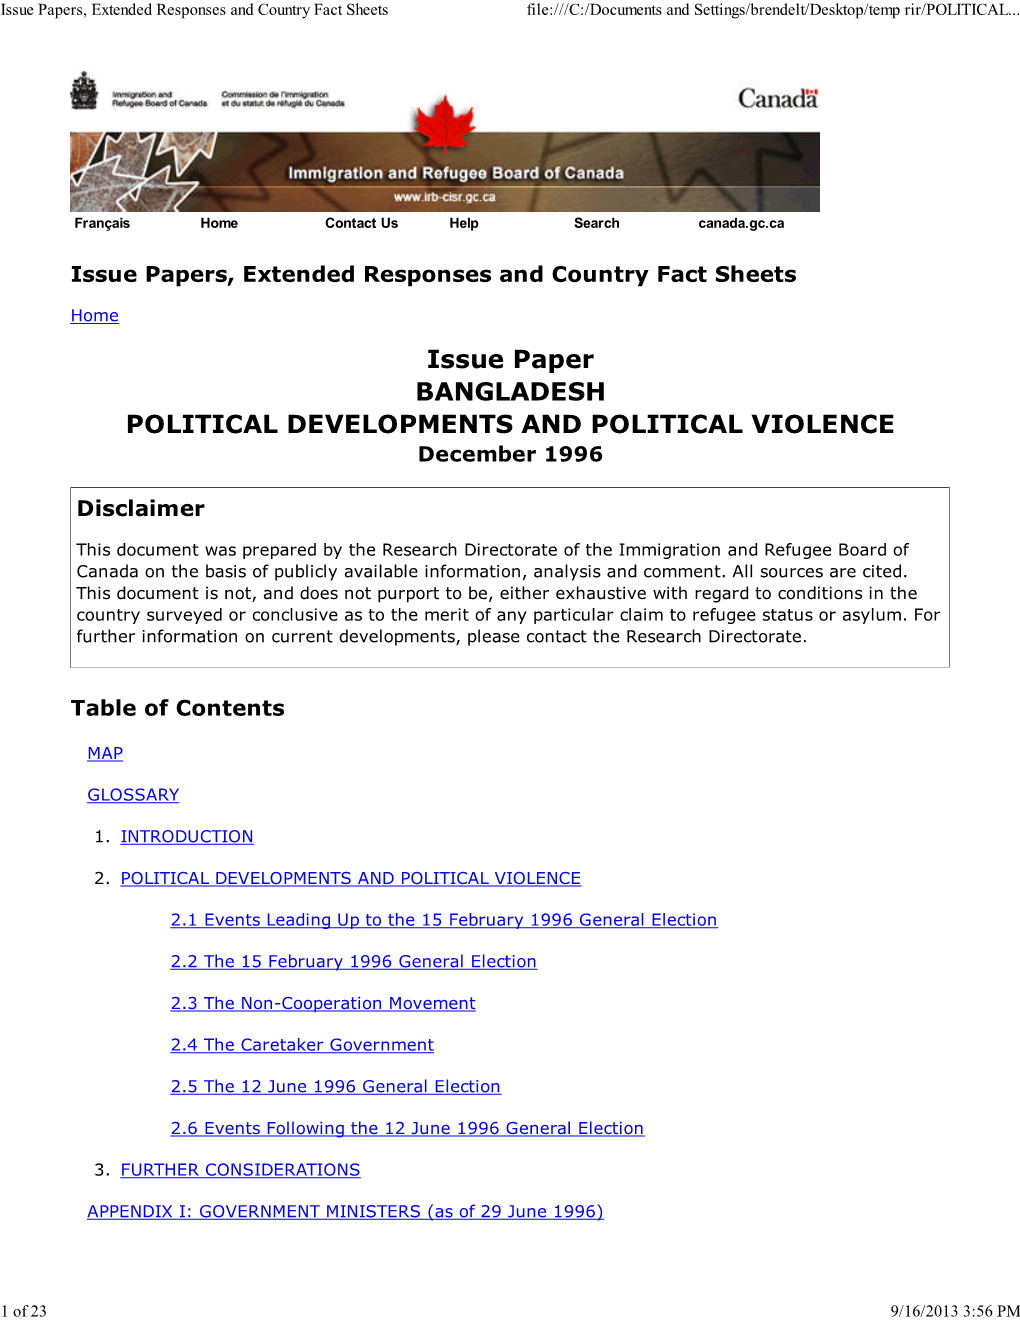 Issue Paper BANGLADESH POLITICAL DEVELOPMENTS and POLITICAL VIOLENCE December 1996